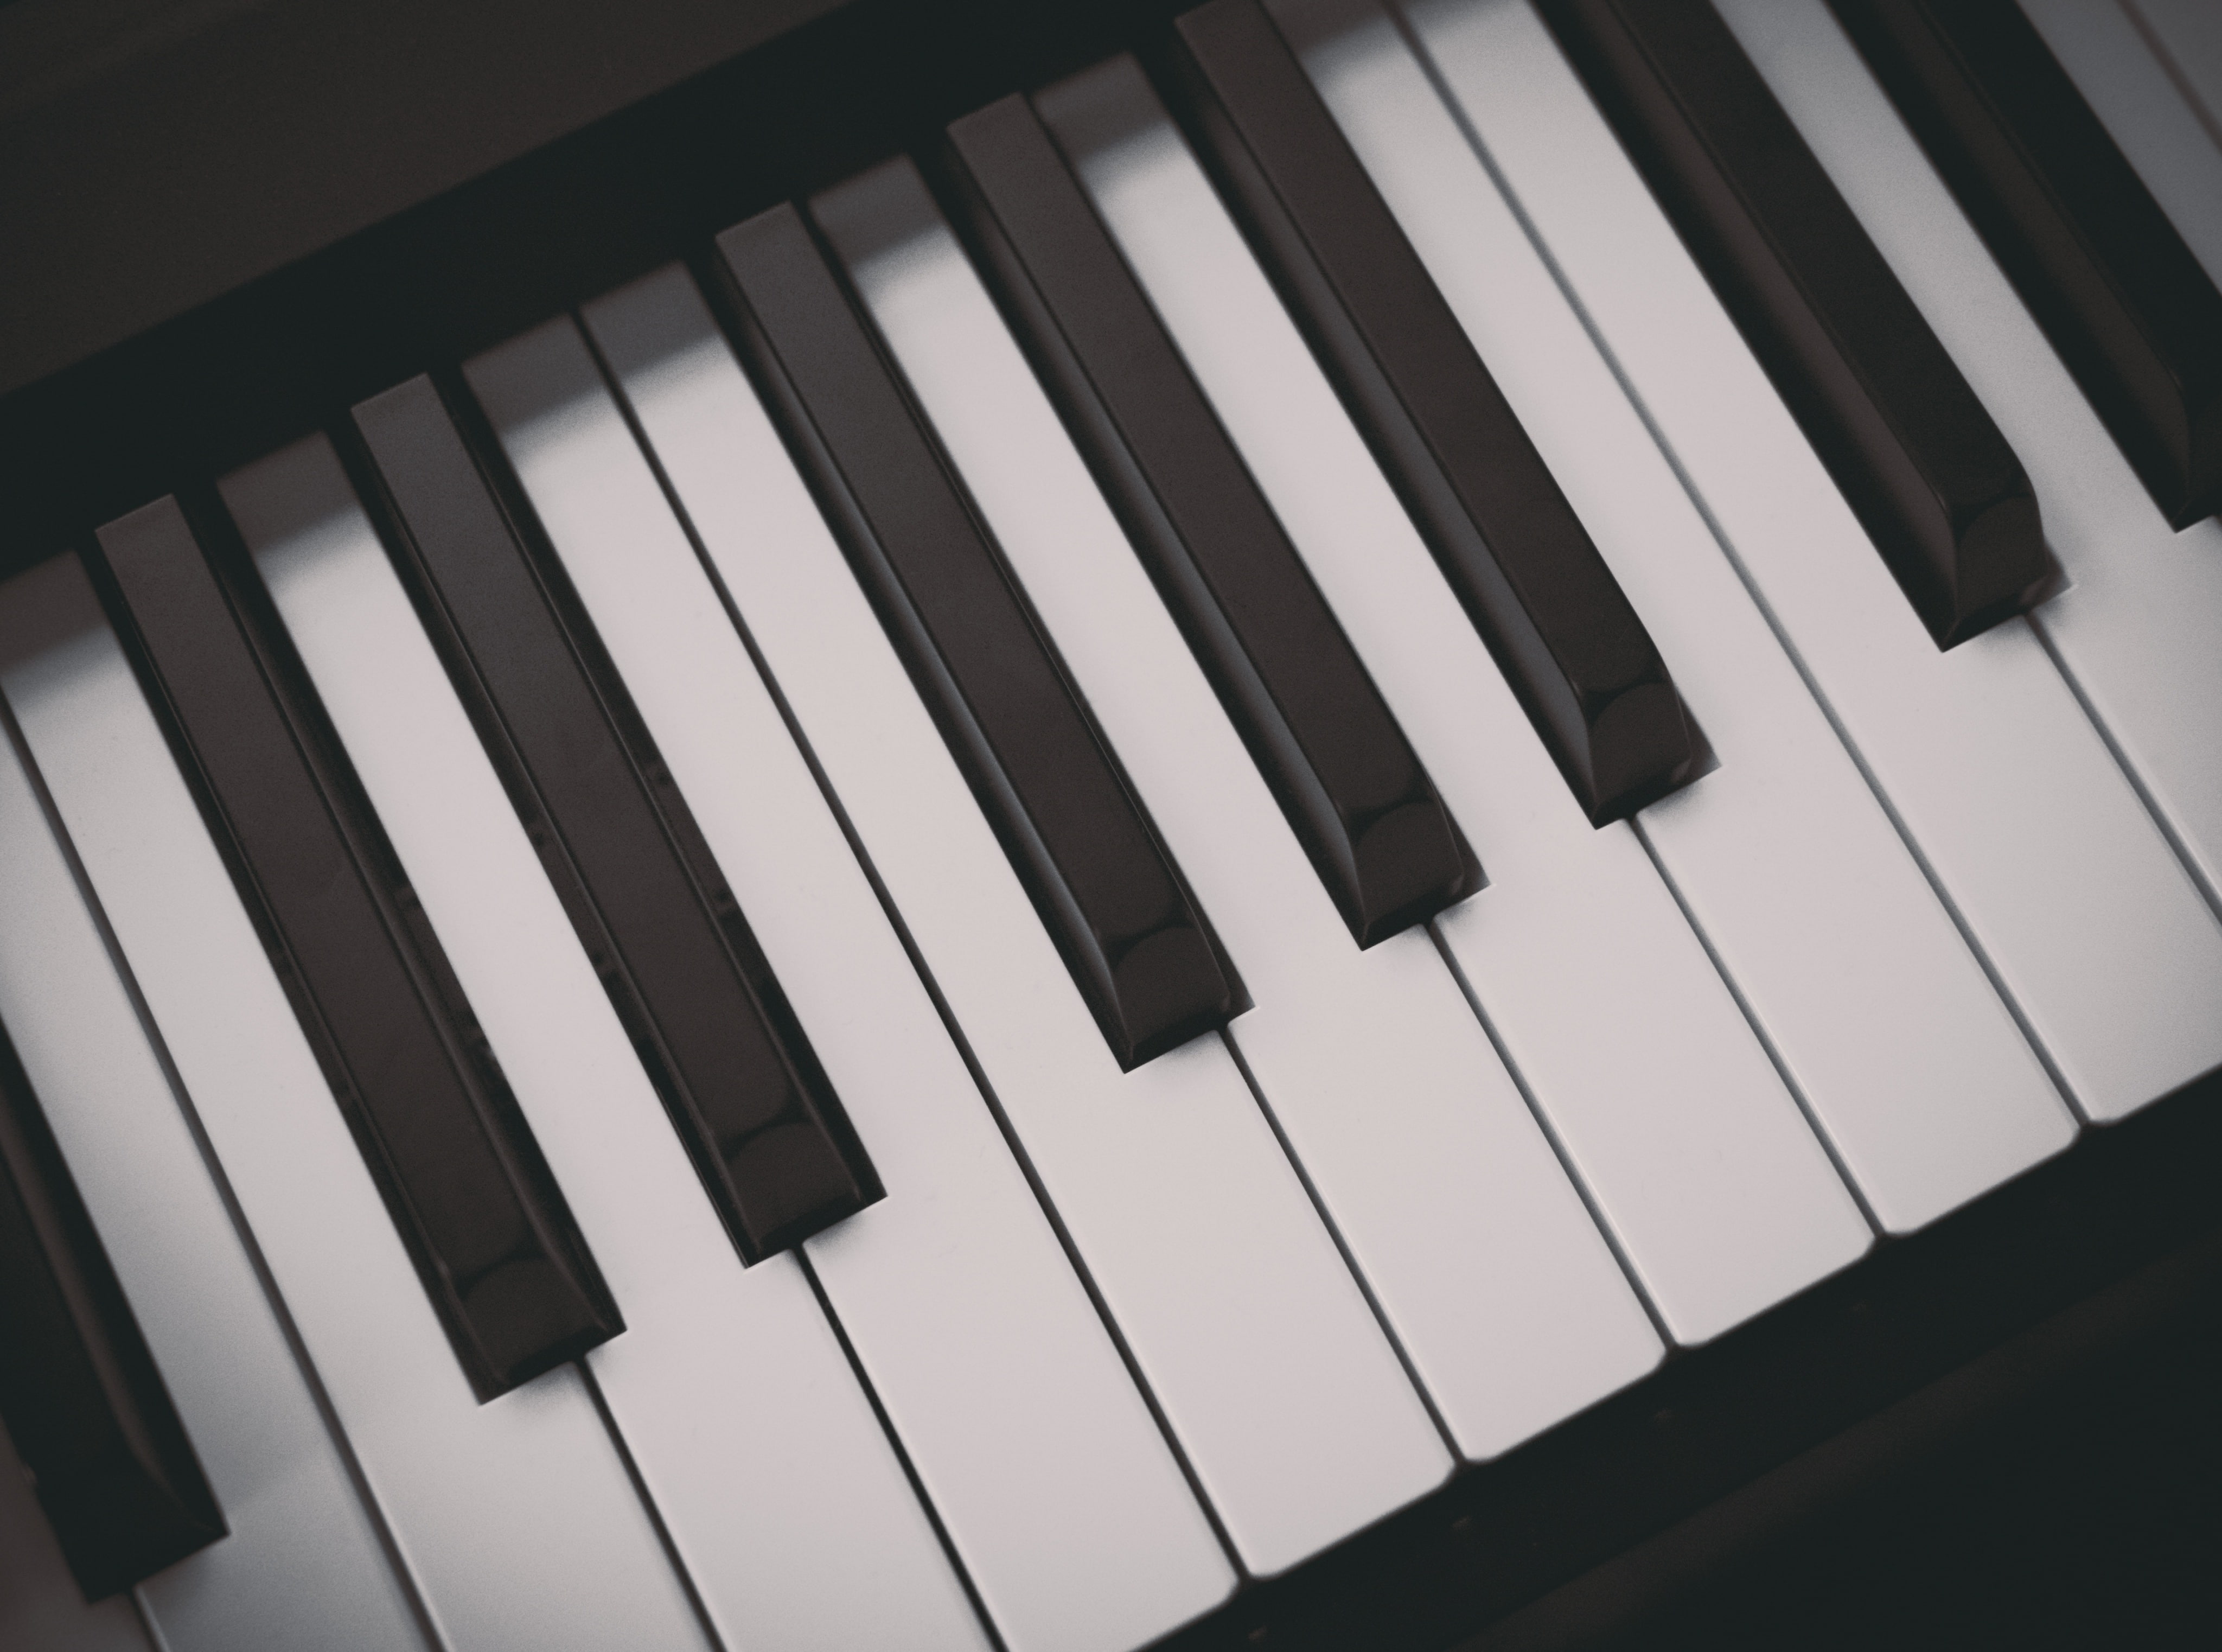 Piano Keyboards, Music, Musical, White, Black, Concert, Sound